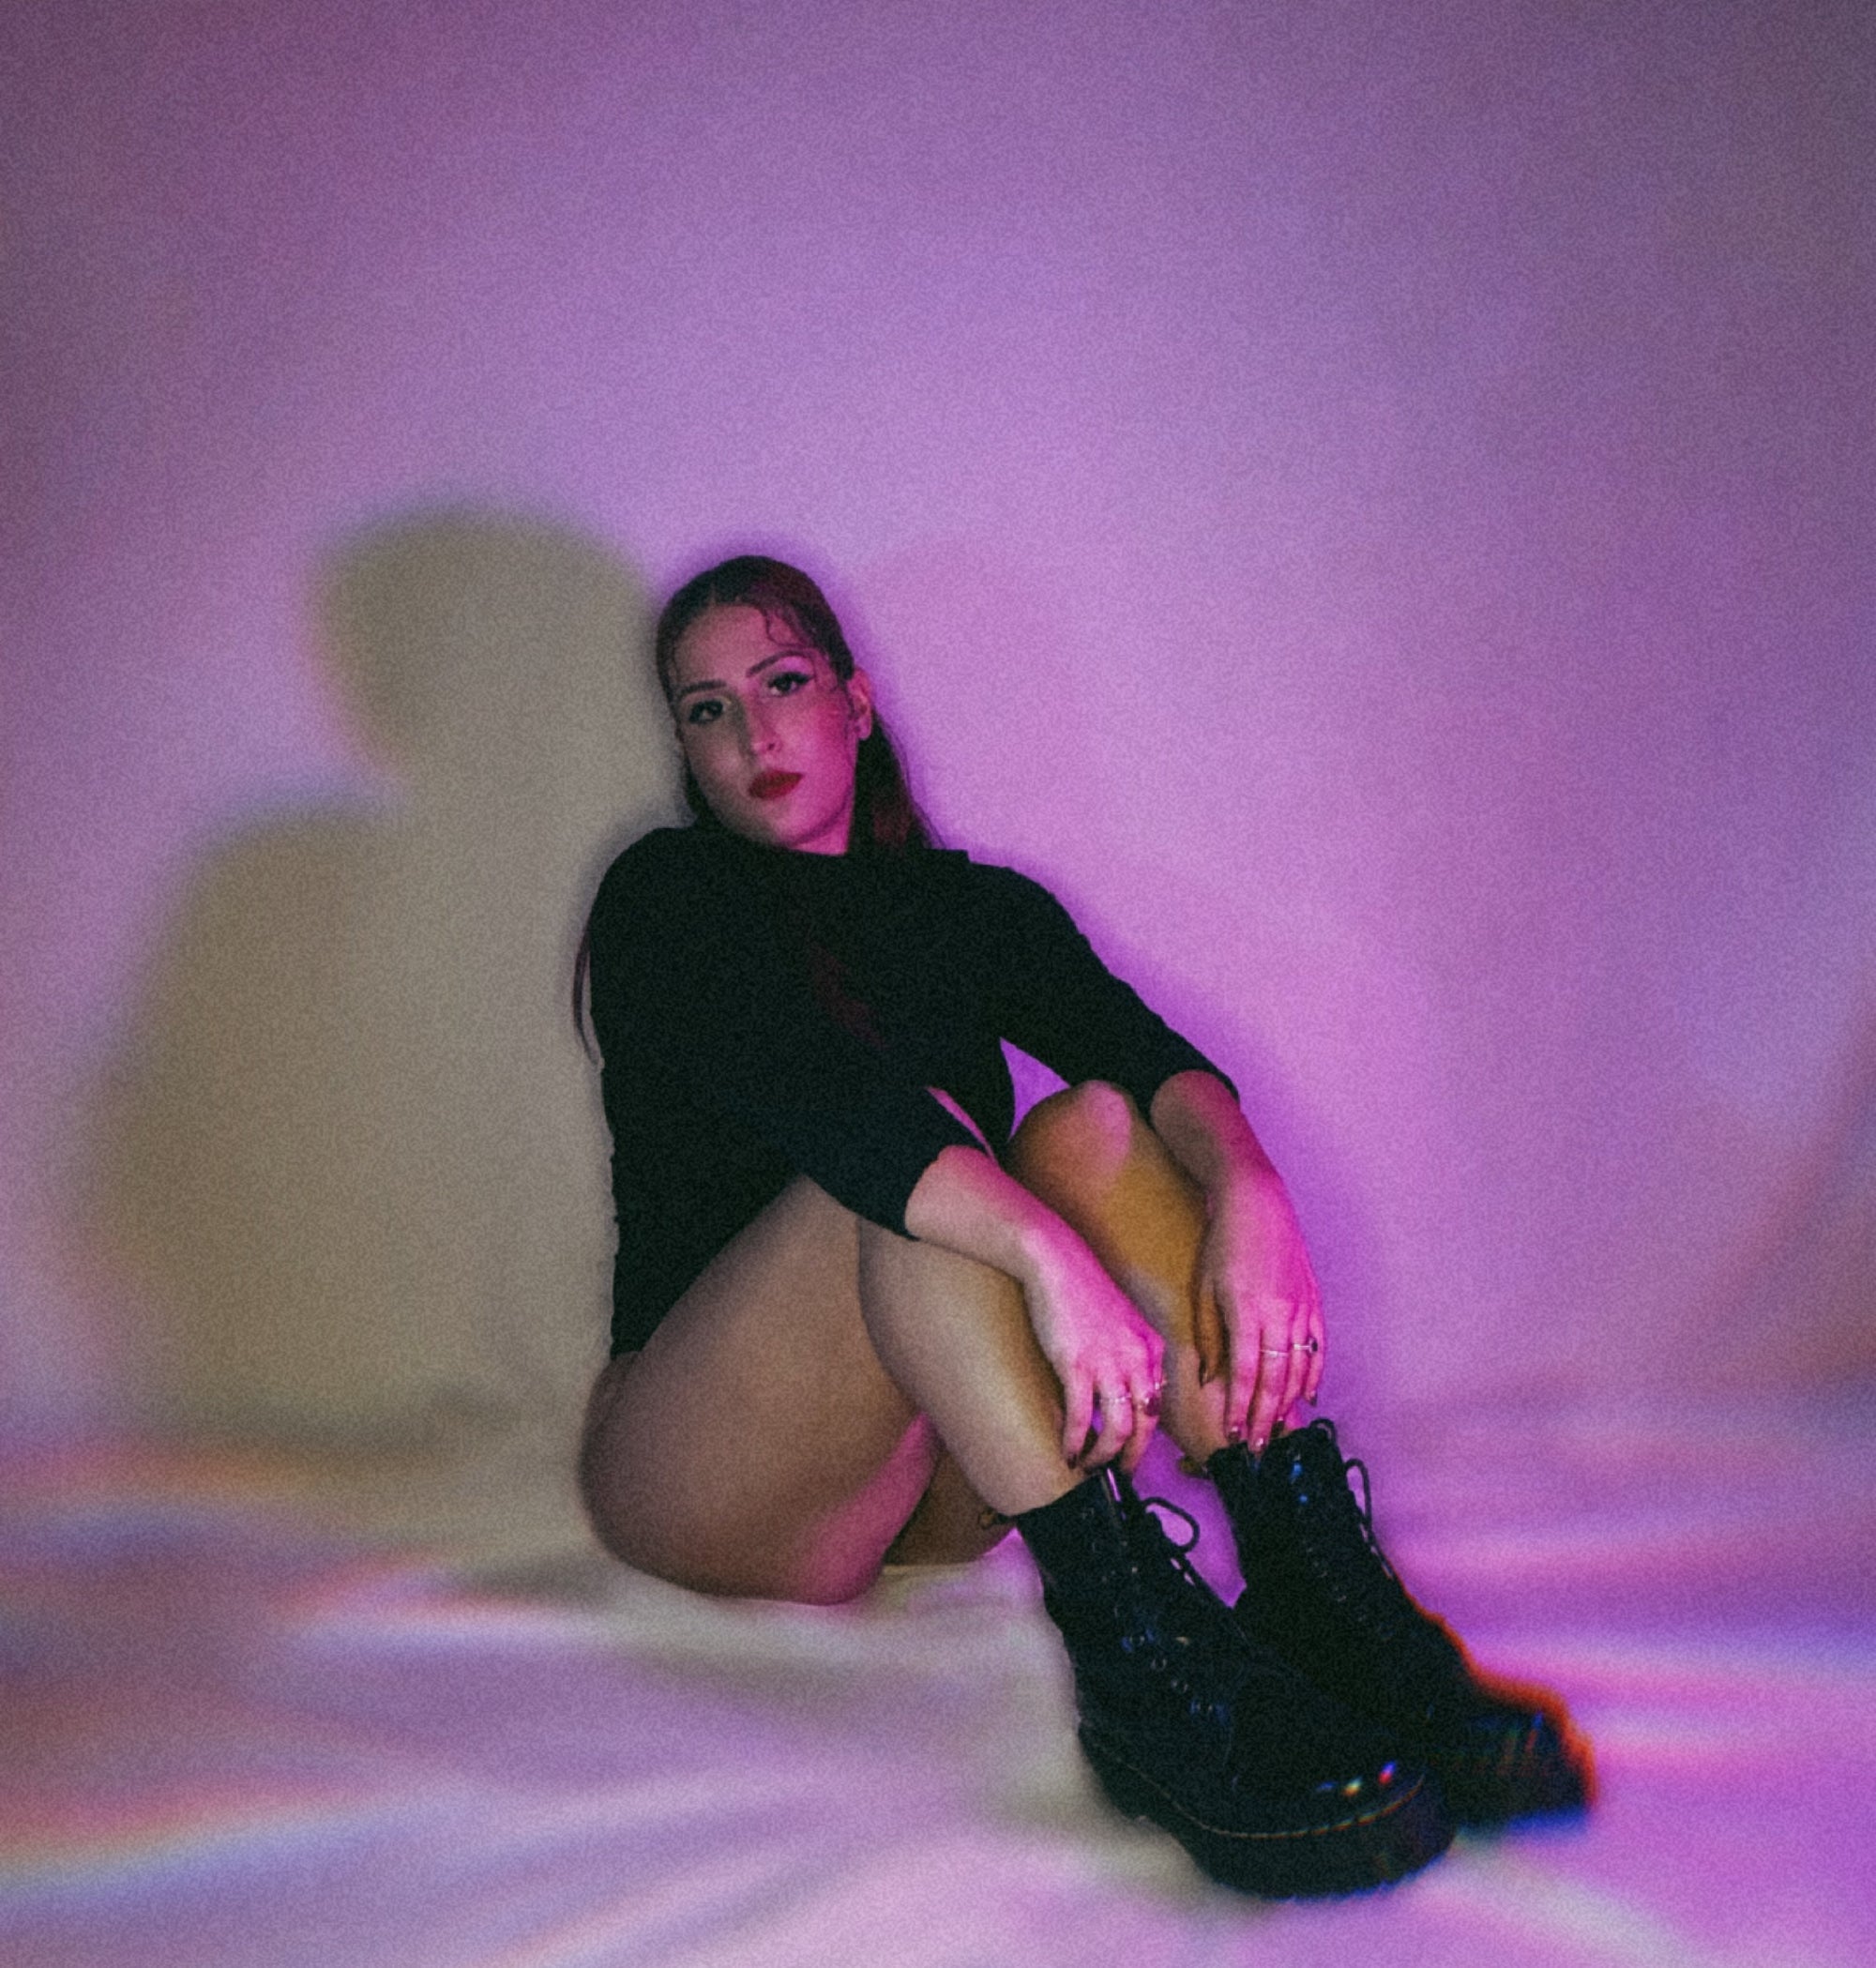 Alexa Perez shares a personal journey through her twenties with 'Dear Future Me'